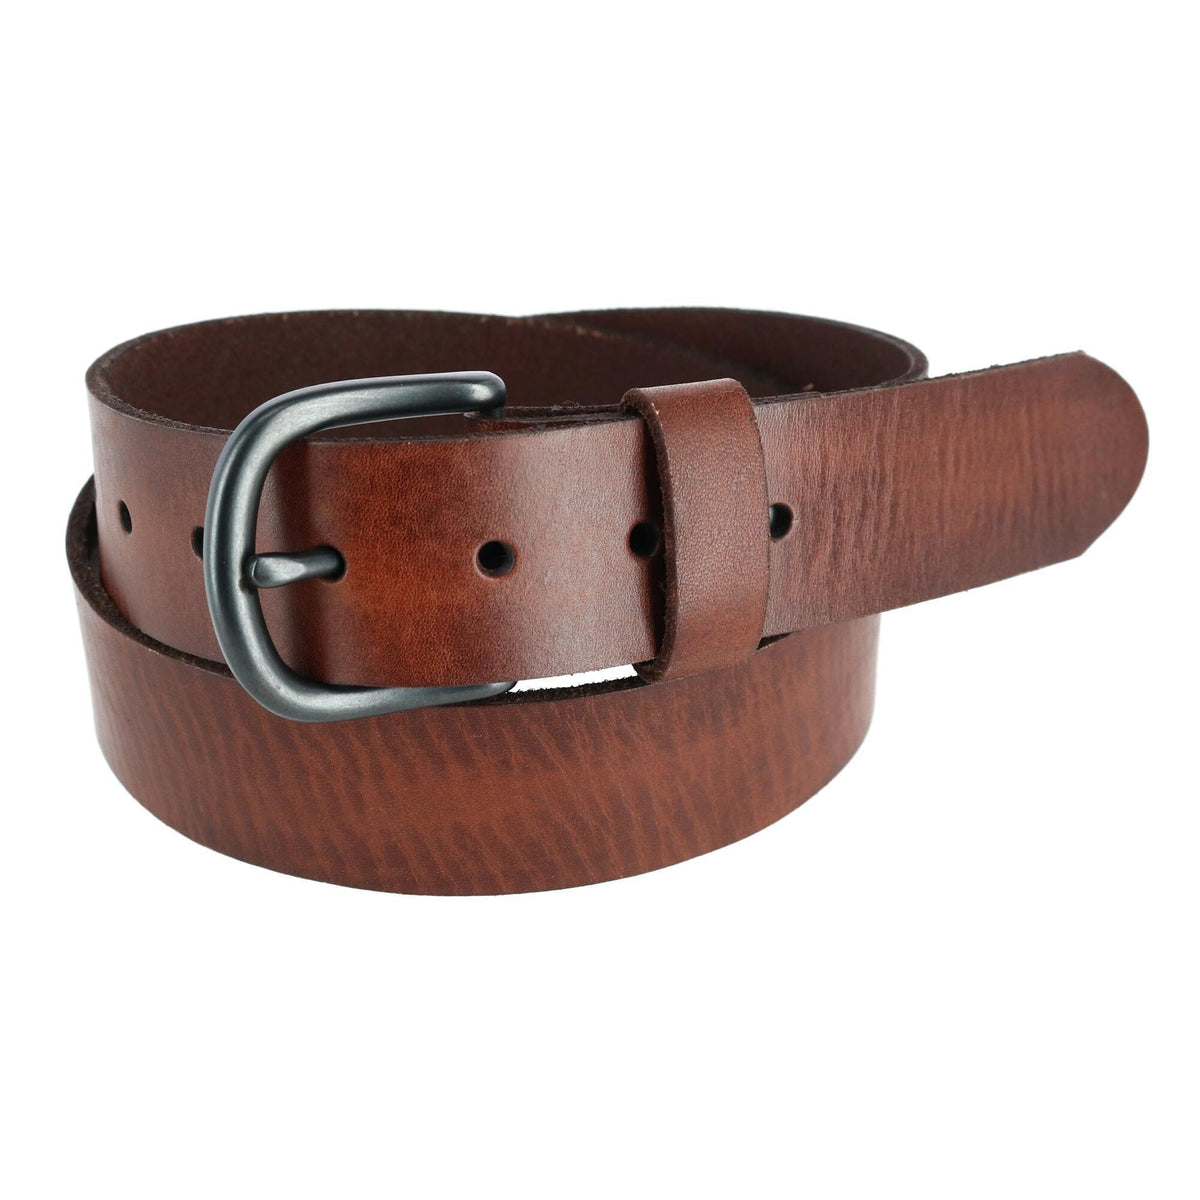 Men's Vegetable Tanned Distressed Leather Belt by Wrangler | Casual ...